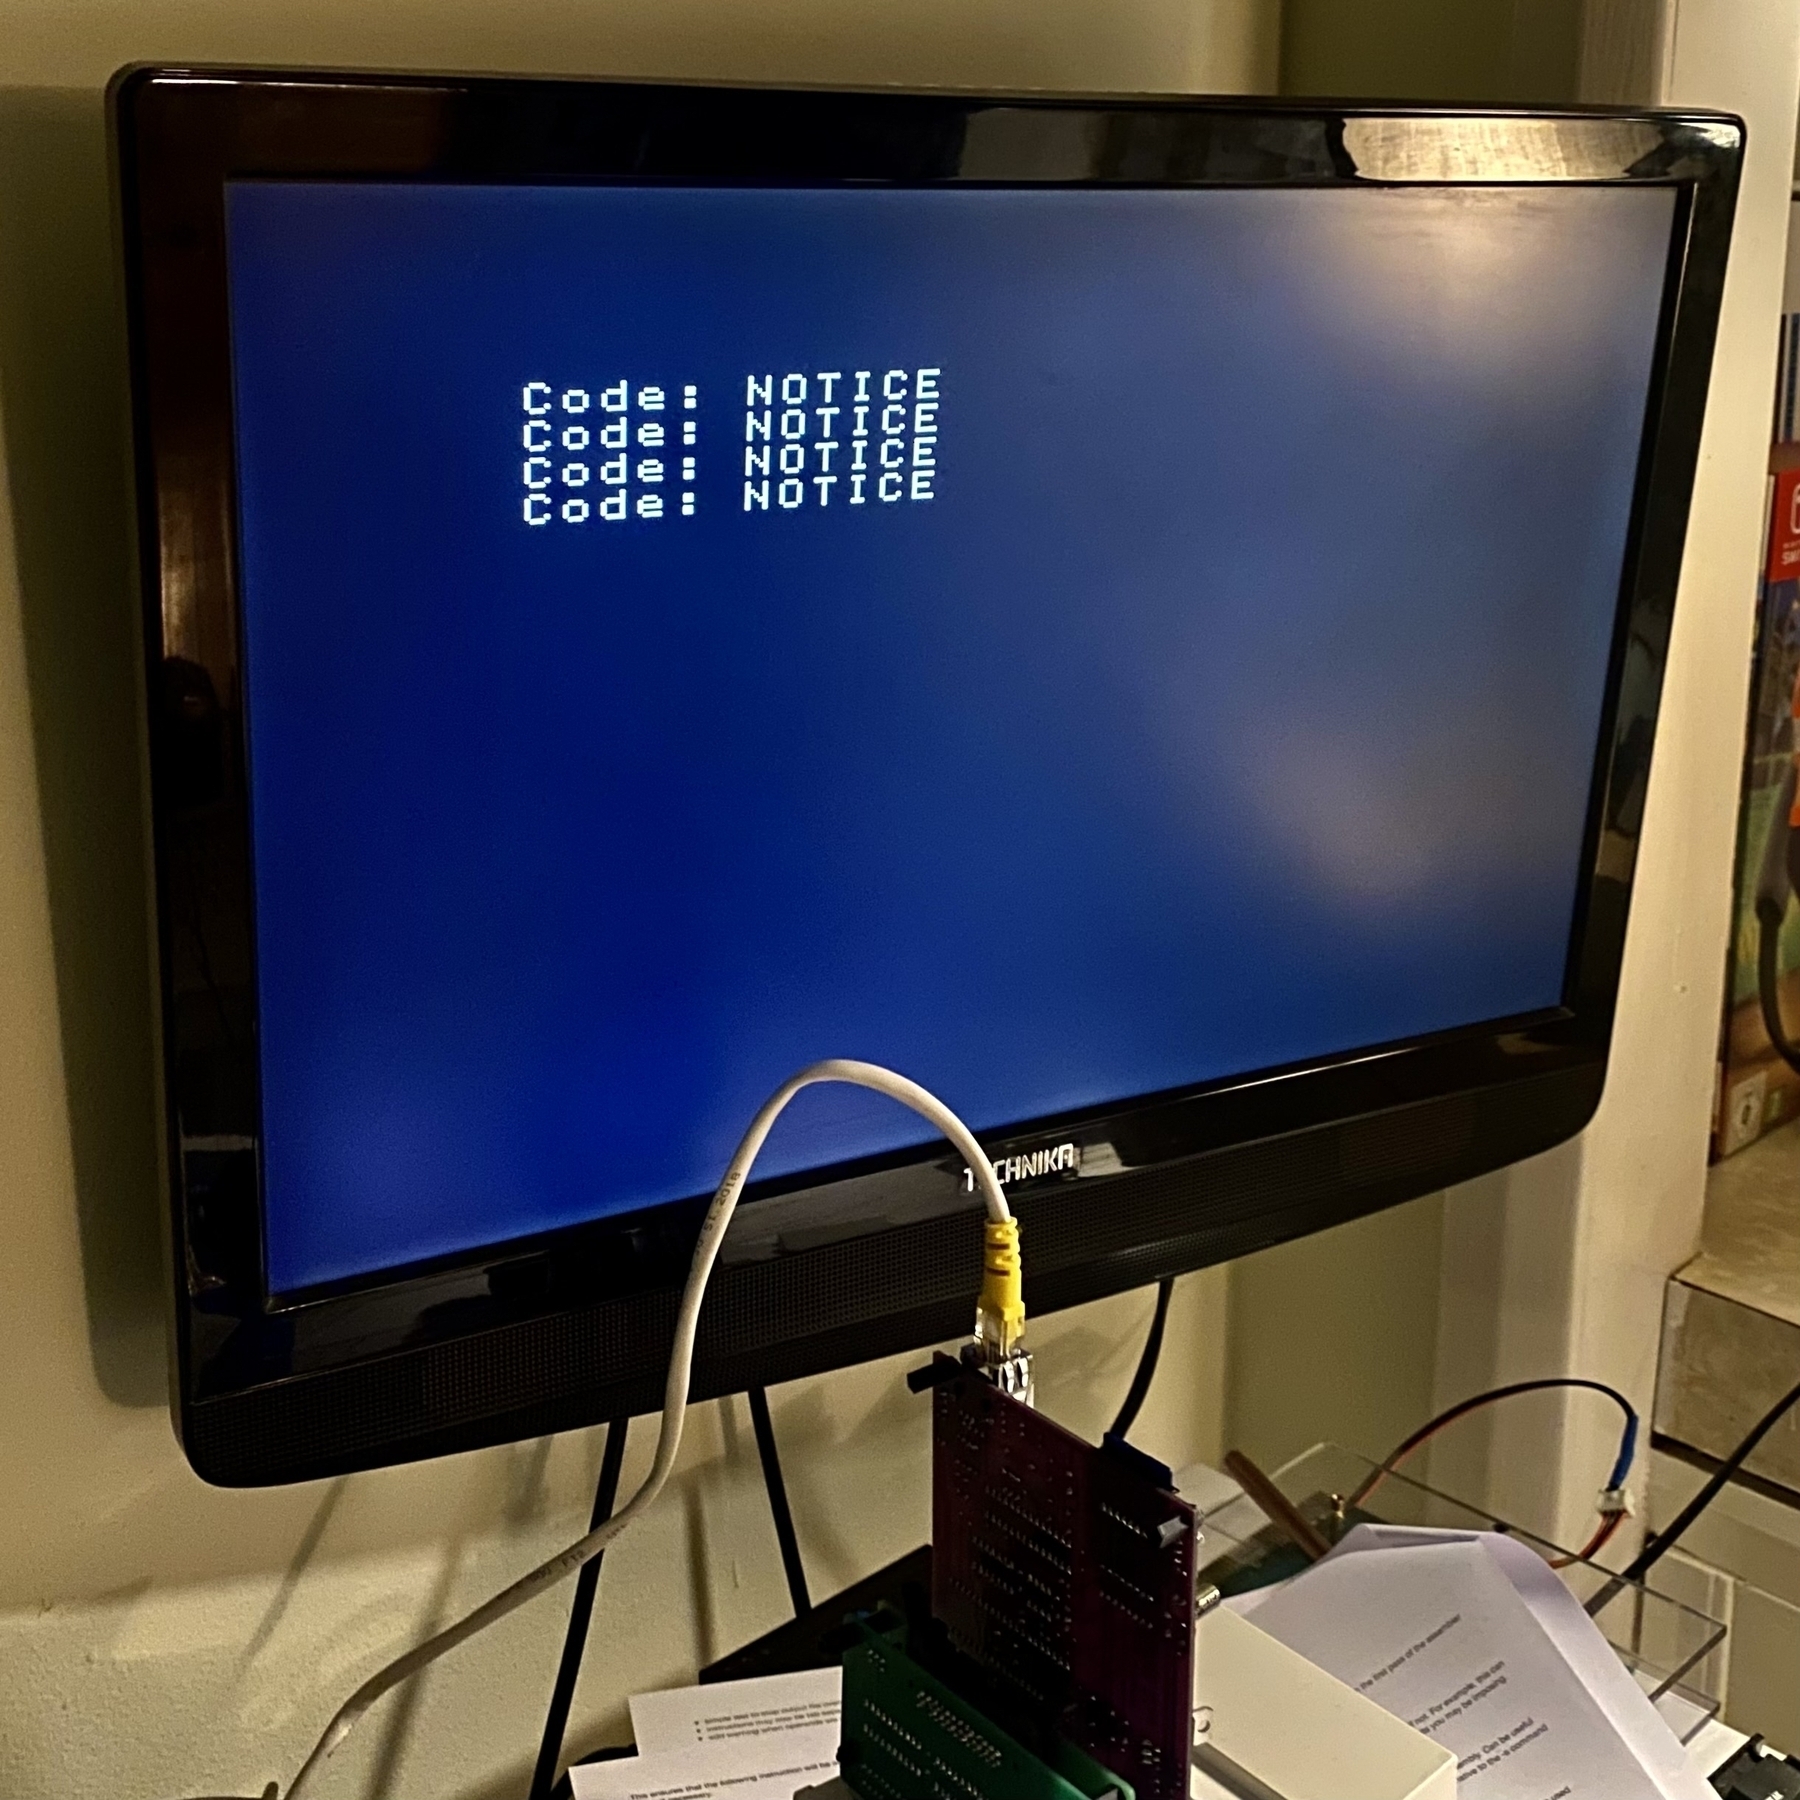 SAM Coupé display showing the text “Code: NOTICE” implying it’s (trying to) load a code block.